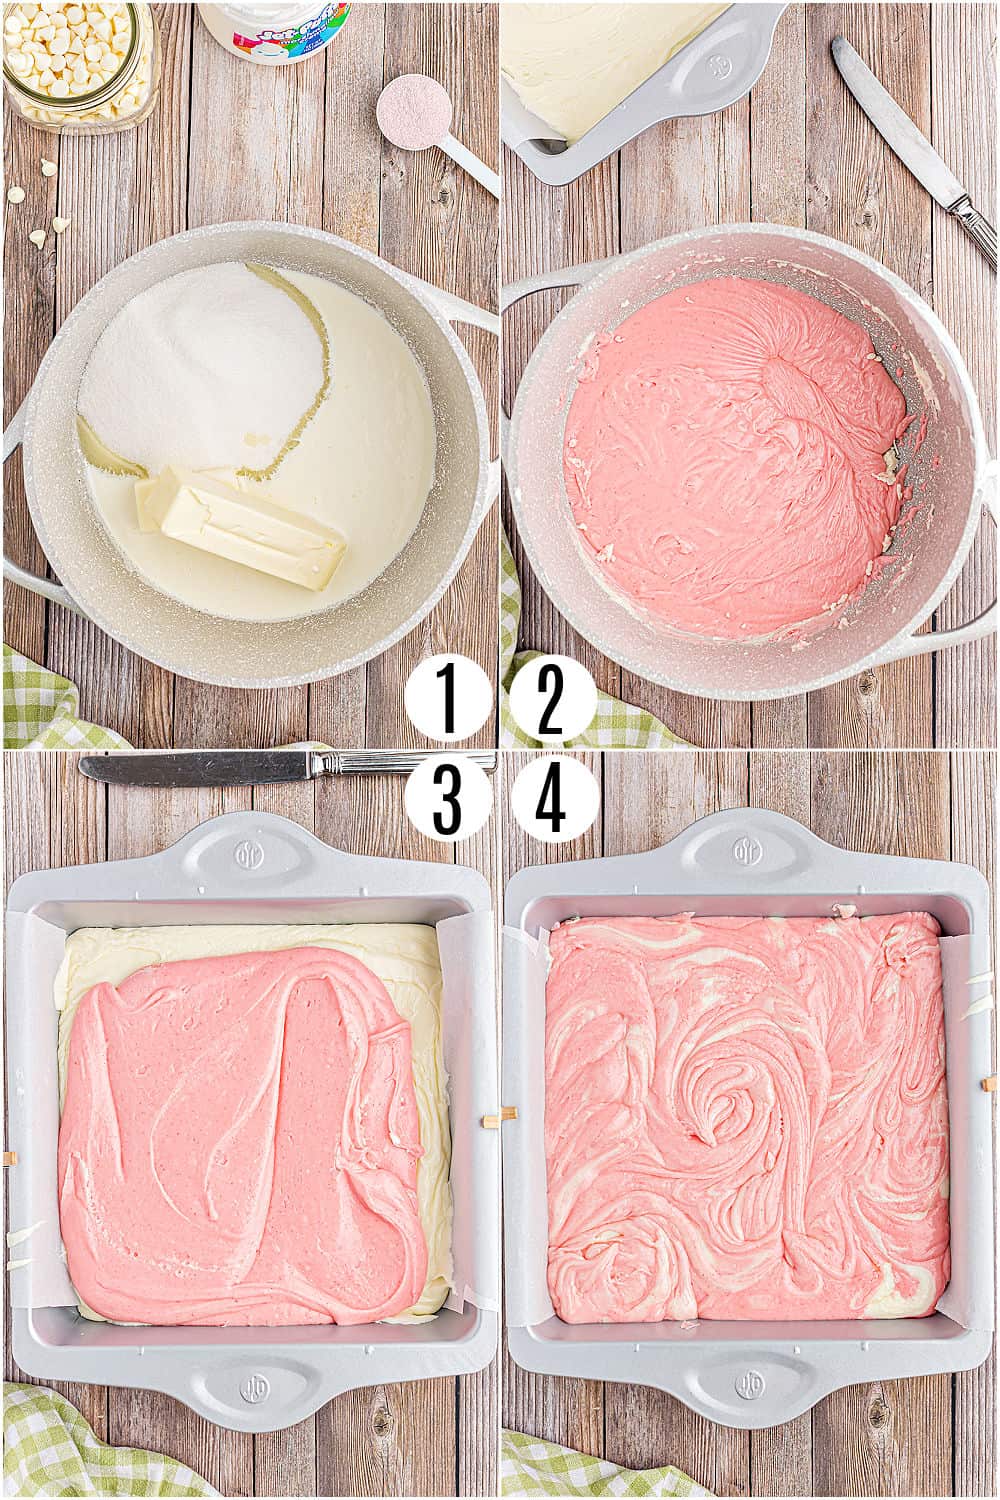 Step by step photos showing how to make strawberry fudge.